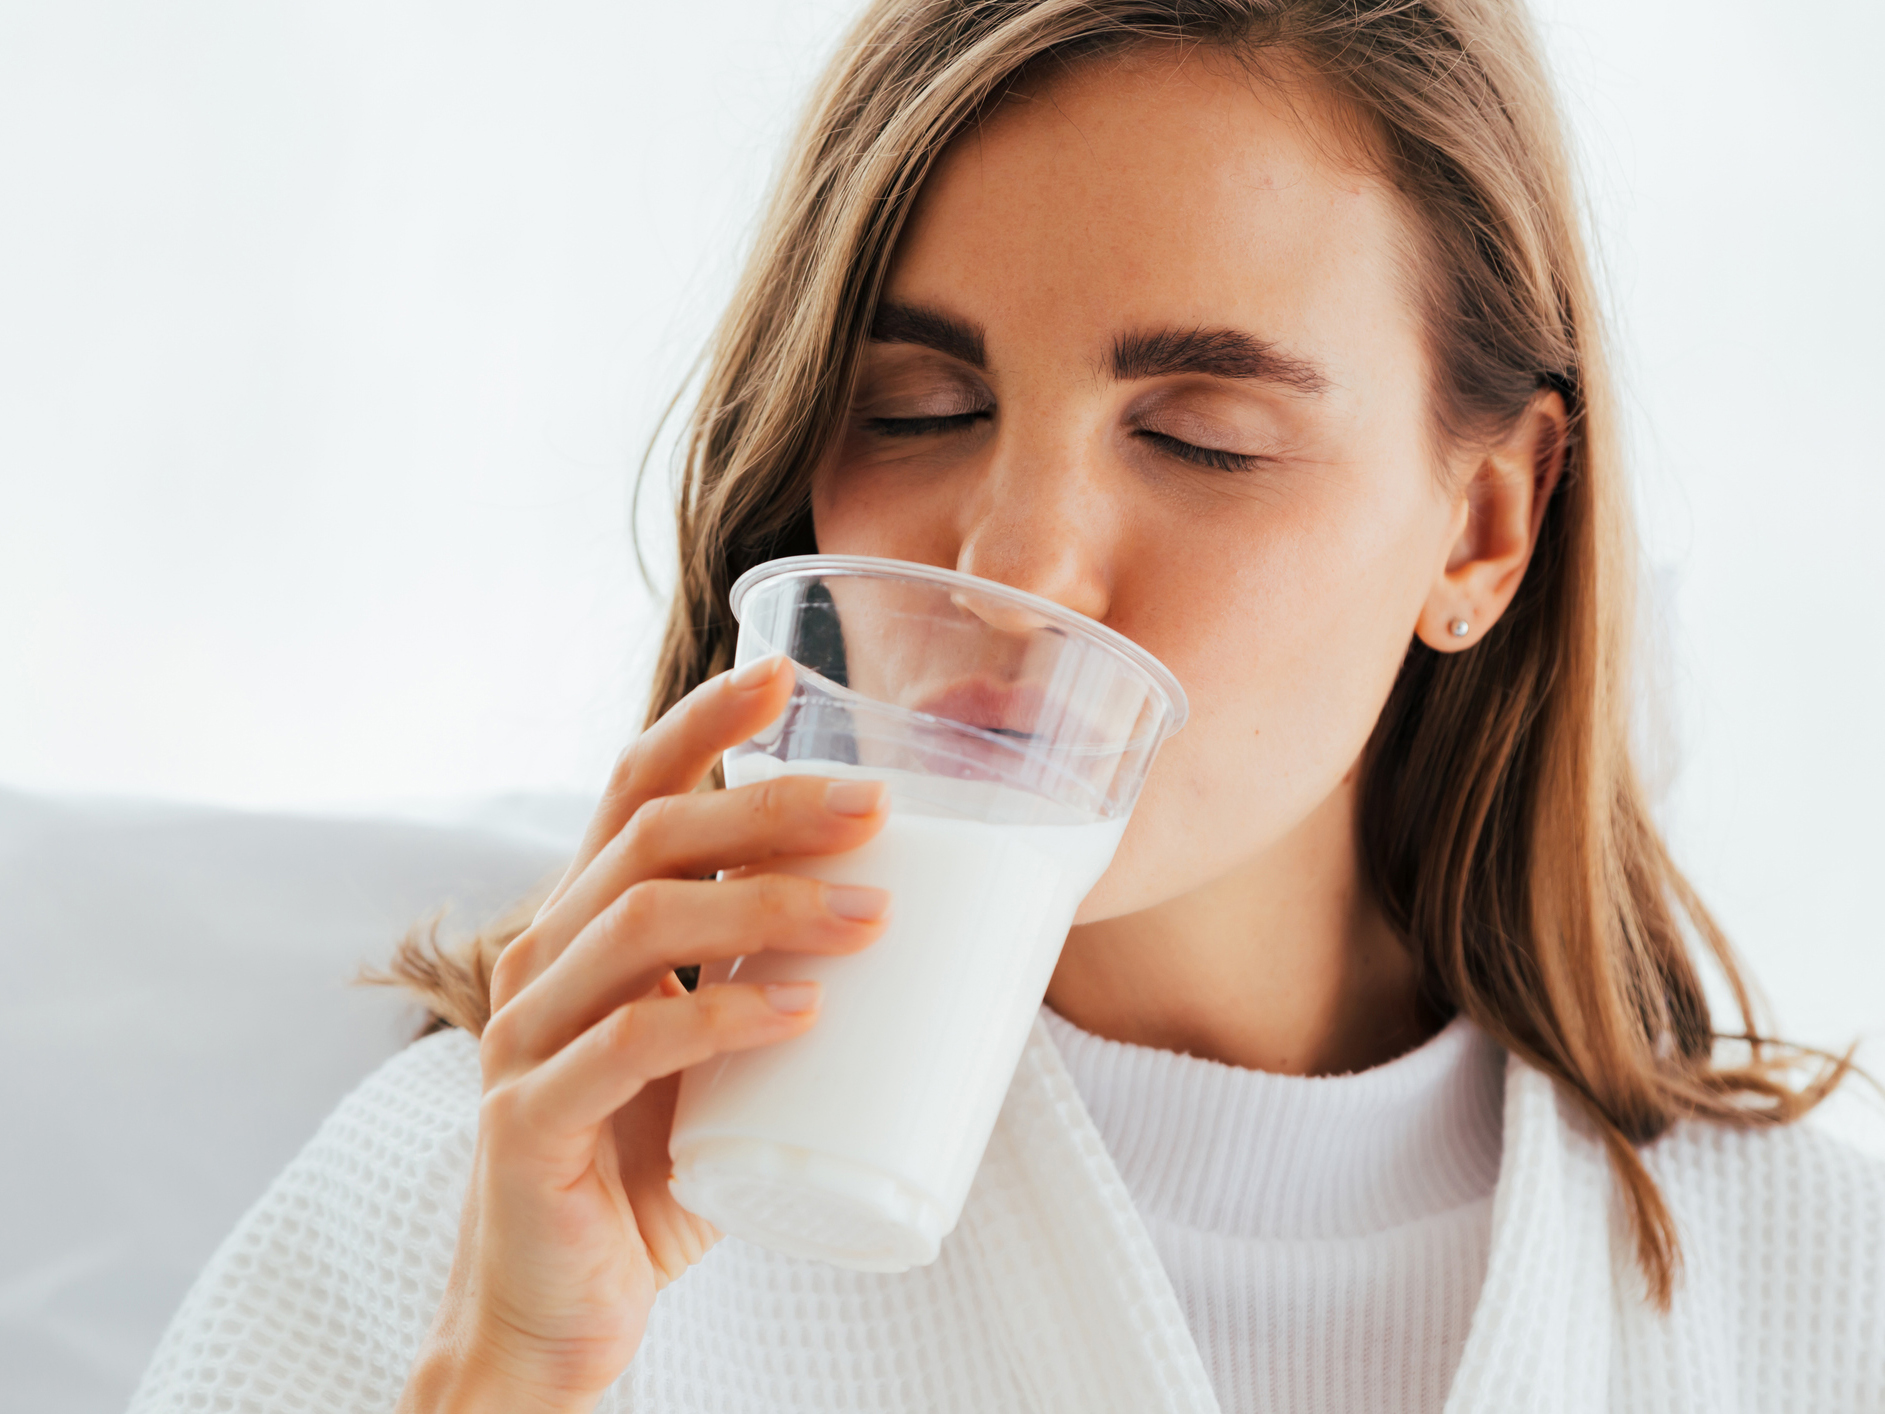 How the wrong milk could completely sabotage your weight loss